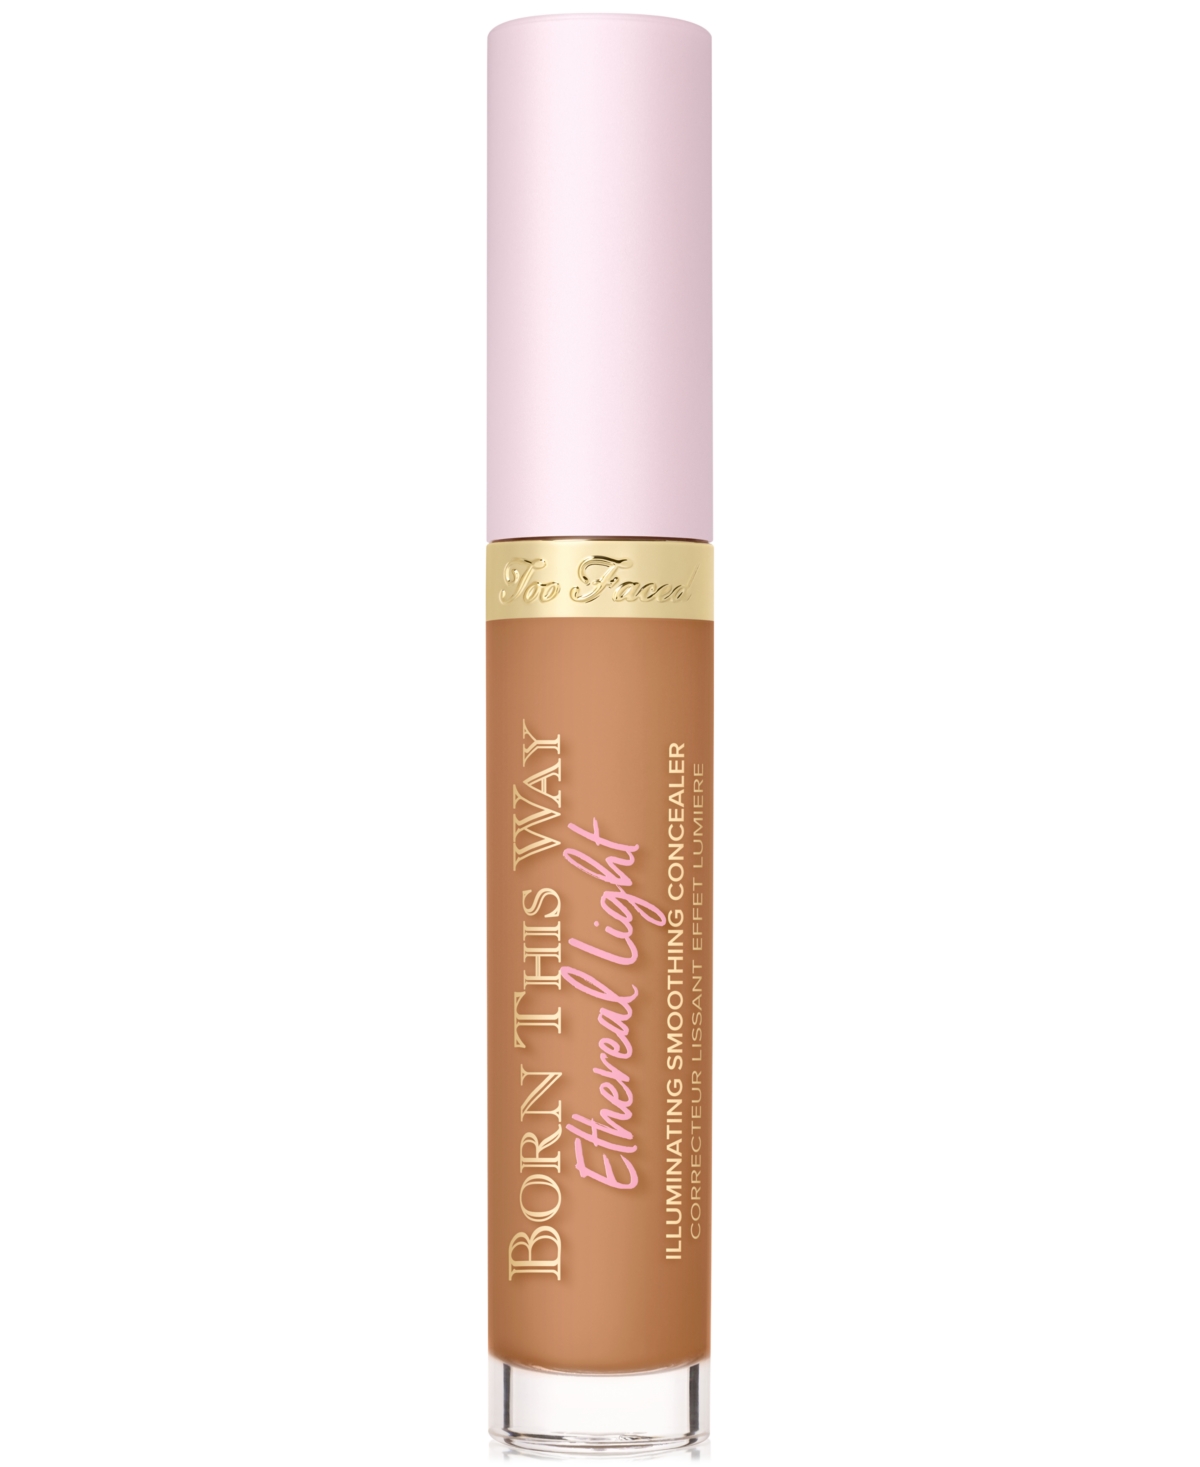 Too Faced Born This Way Ethereal Light Illuminating Smoothing Concealer In Honey Graham - Tan With Neutral Underton